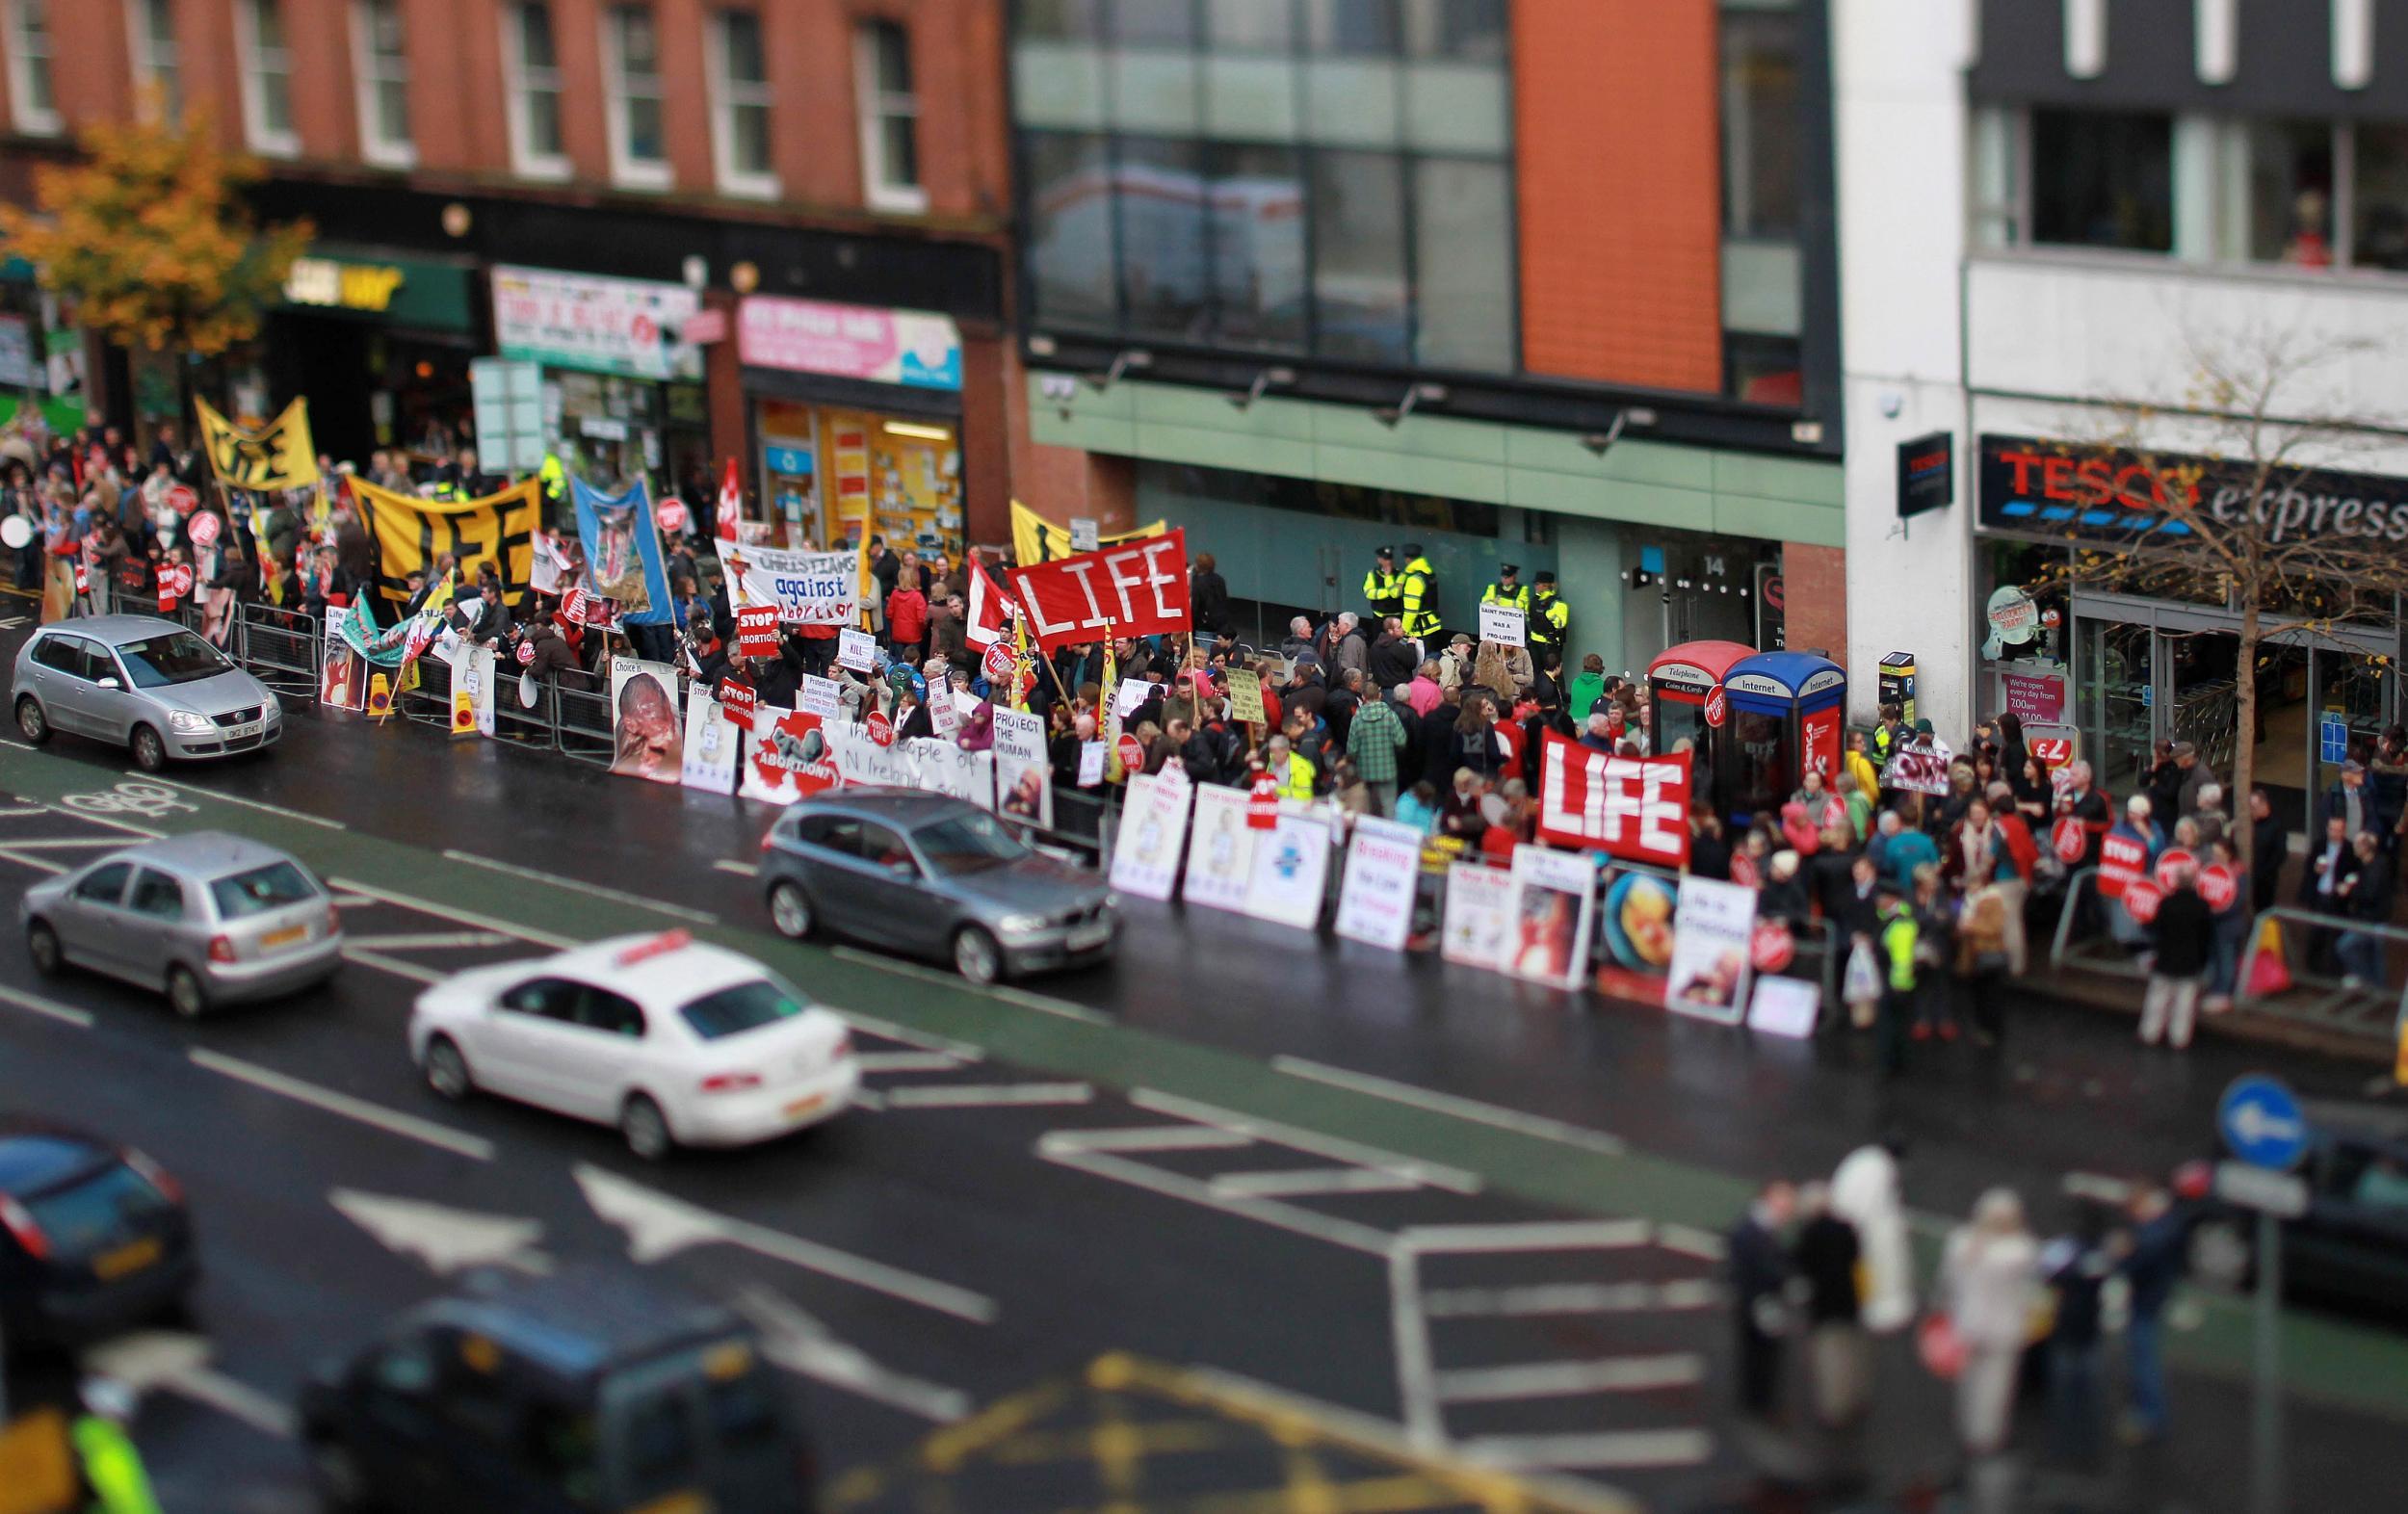 Anti-abortion protesters harass women outside an abortion clinic in Northern Ireland